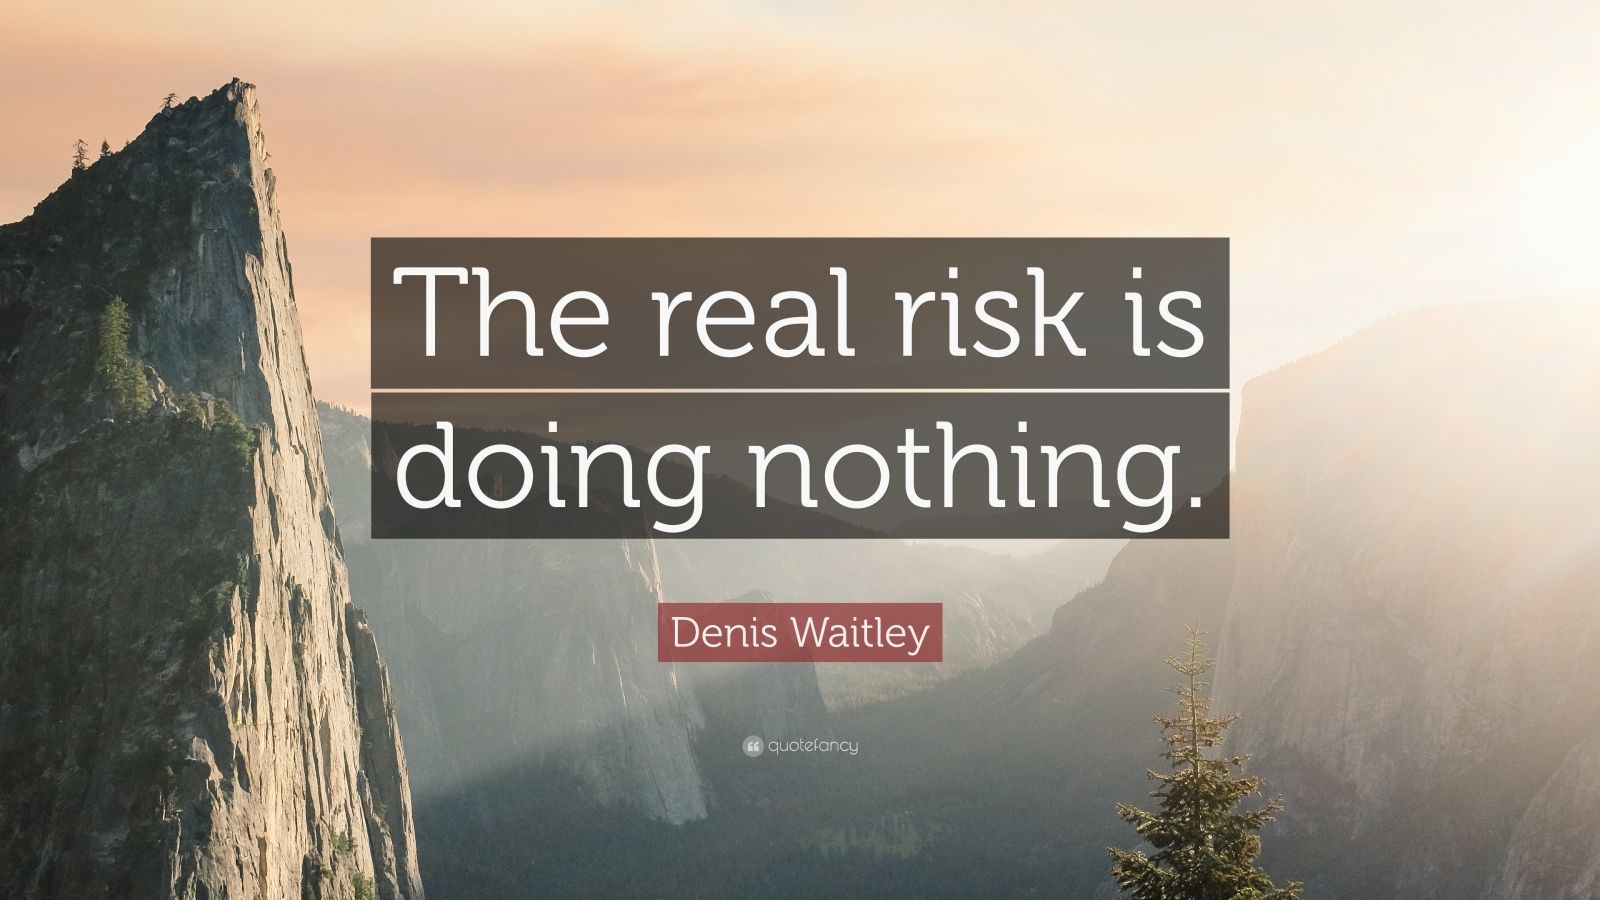 Risk Quotes (40 wallpapers) - Quotefancy